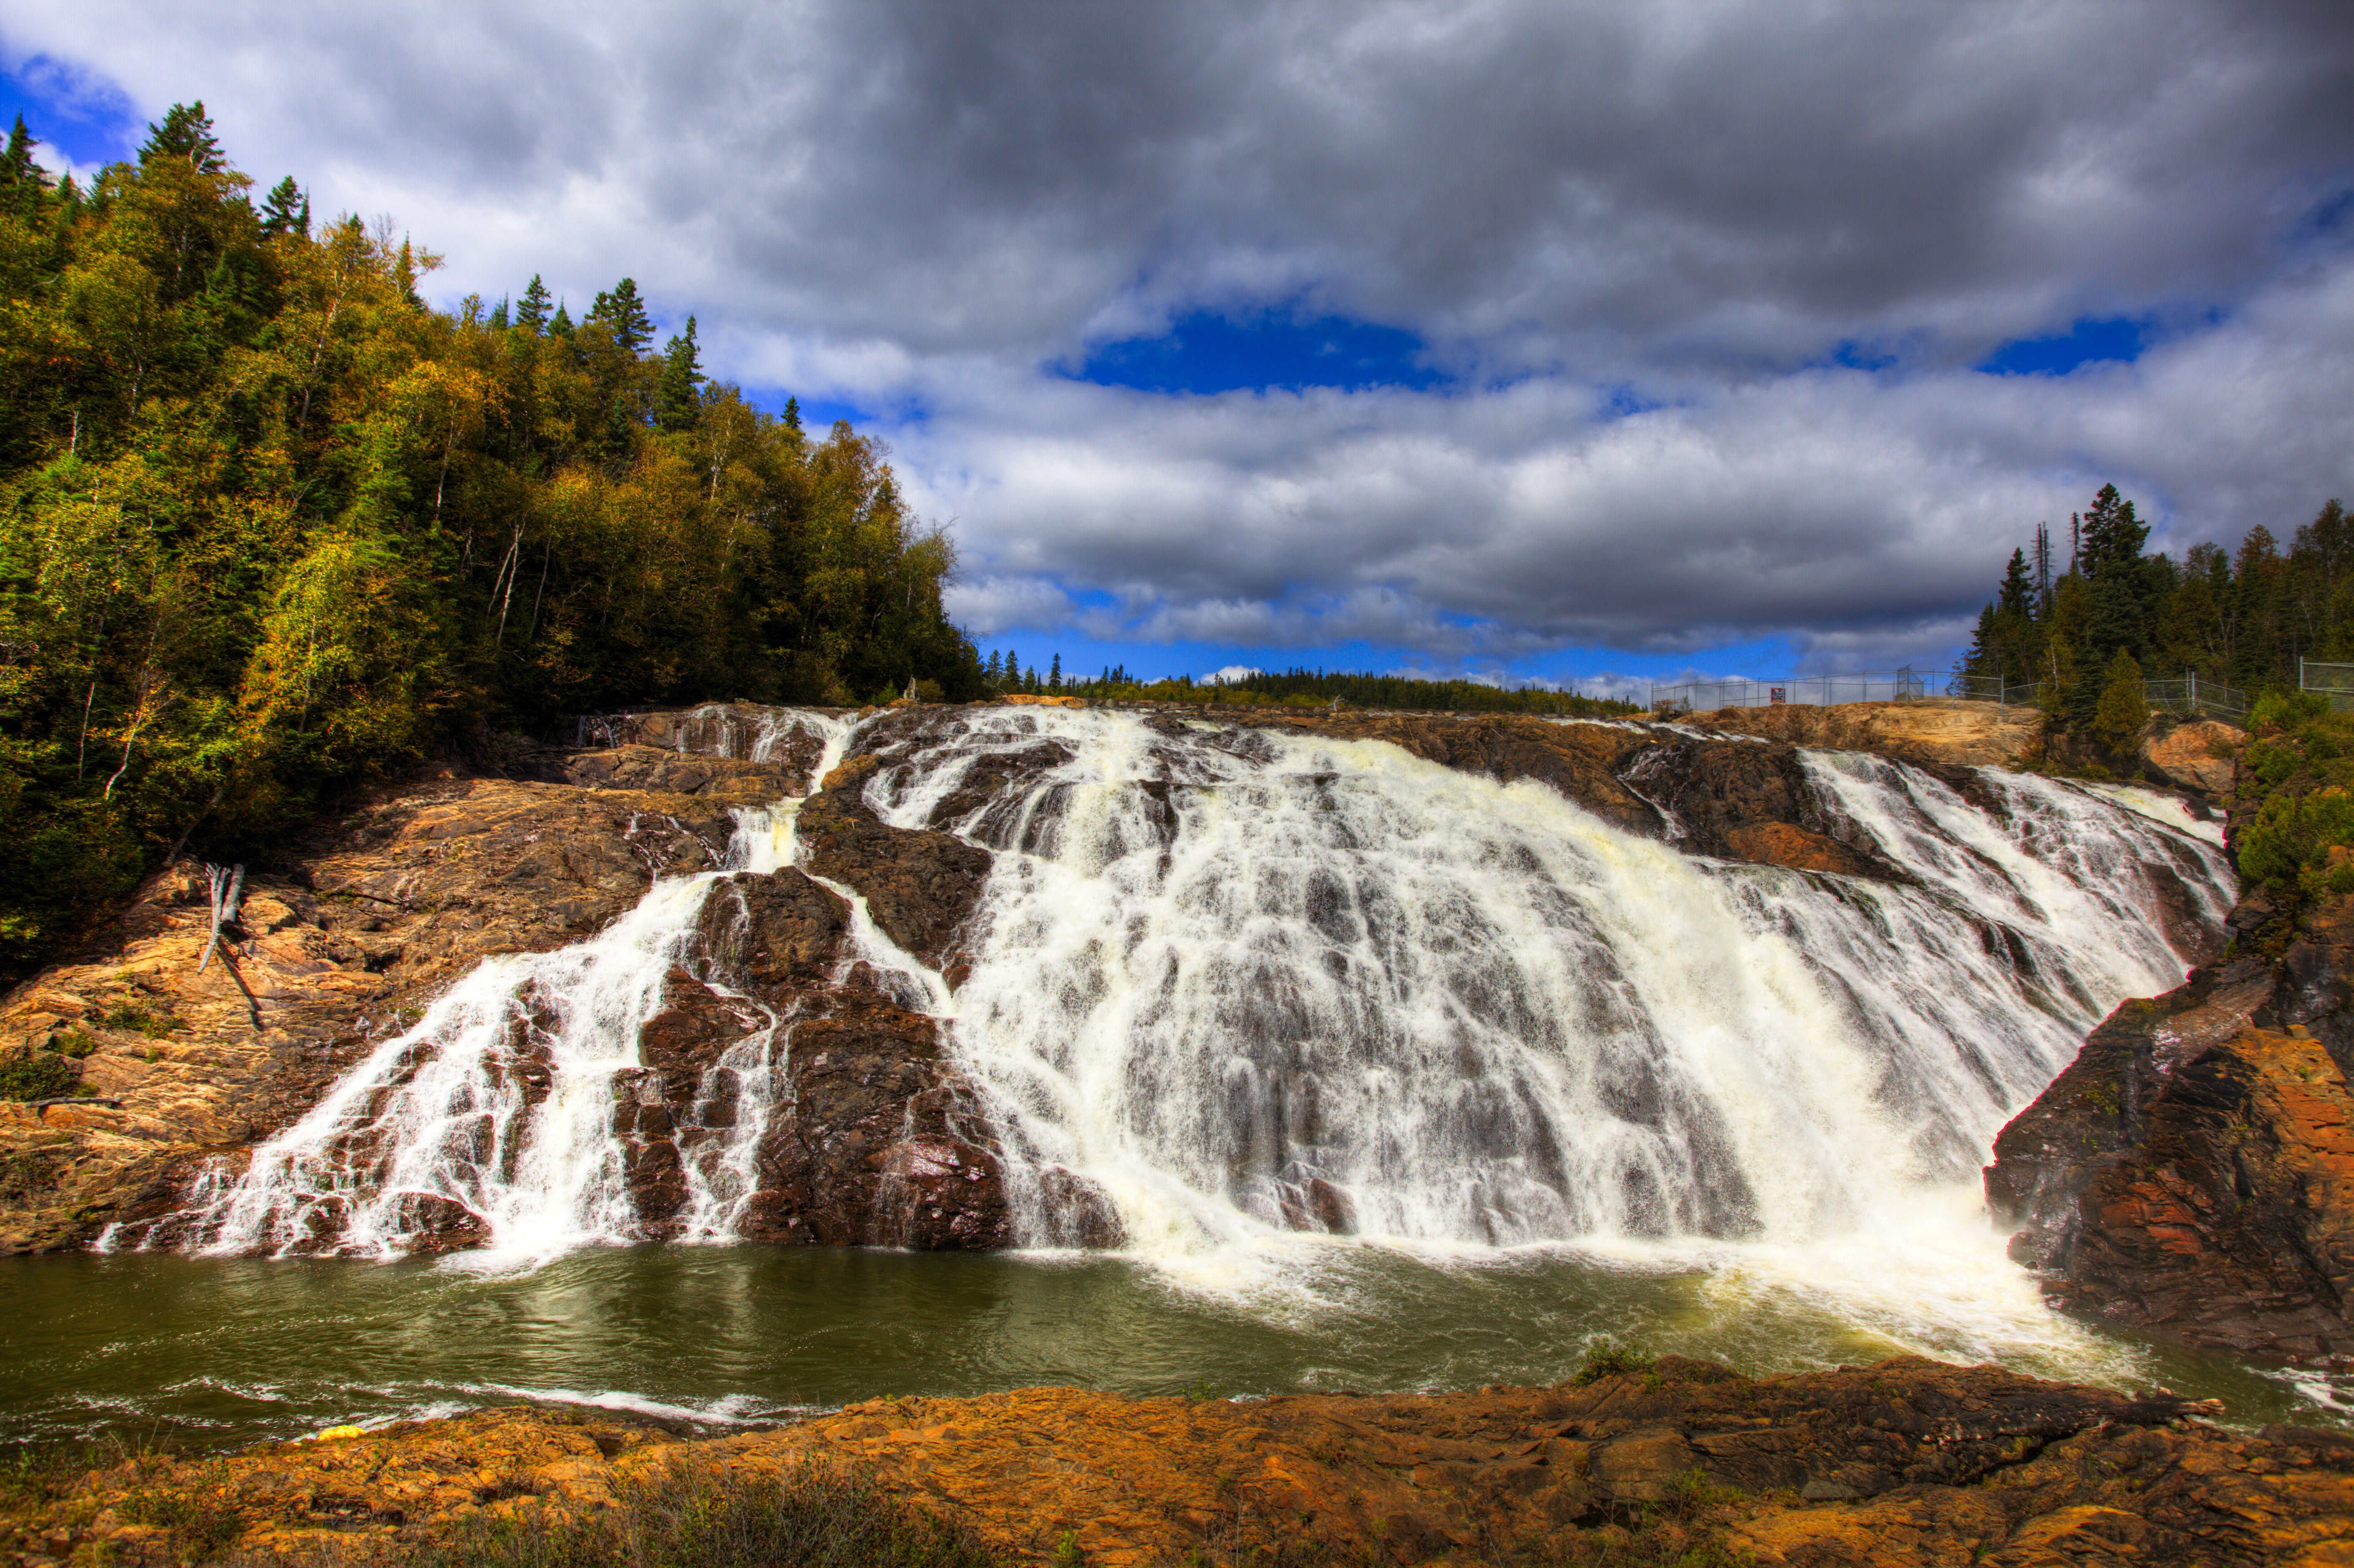 Away from the calm waters of the beach, the rapids and waterfalls are a thrilling way to experience the municipality of Wawa